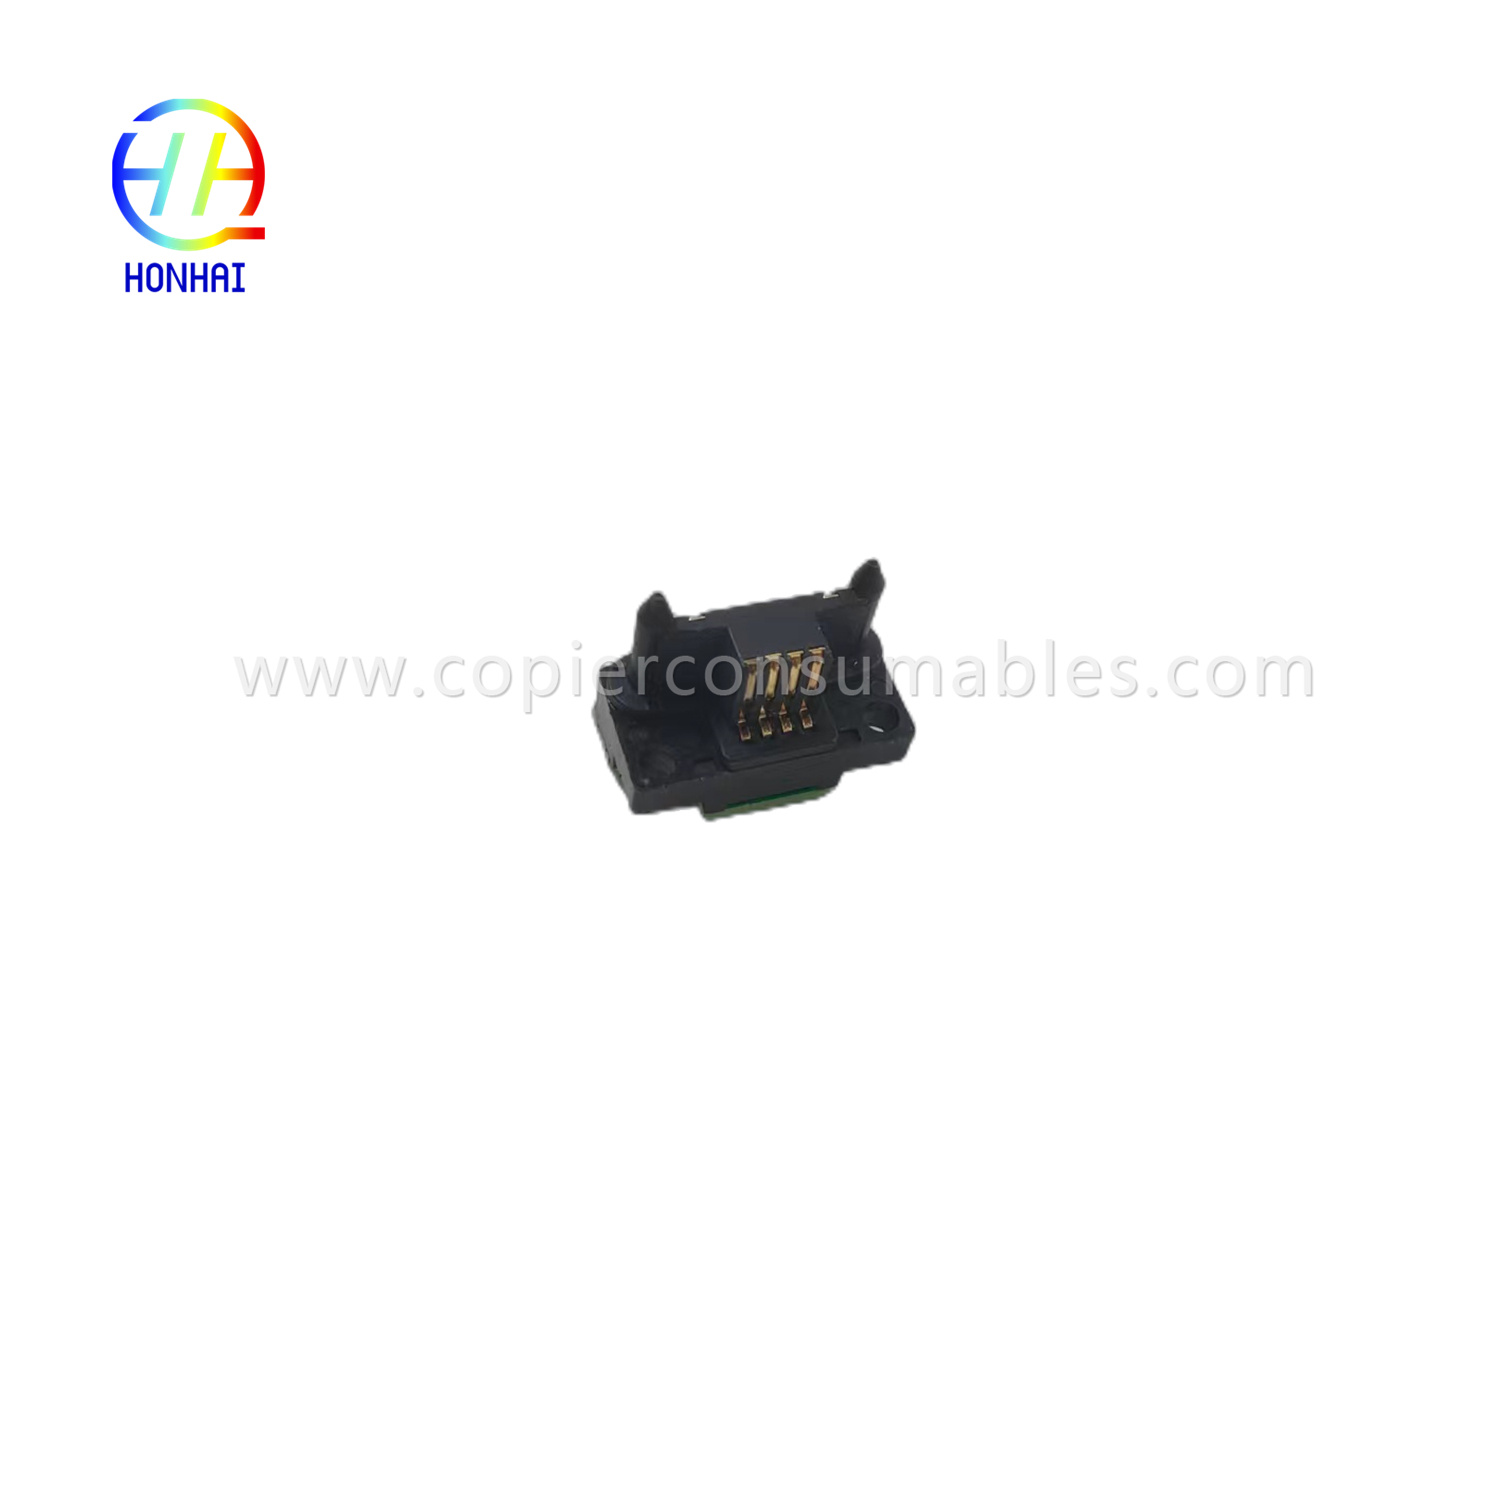 Drum Chip for Xerox 113R00673 113R673 Workcentre 5755 5875 5865 5845 5855 5875 5890 Chip (1)_副本